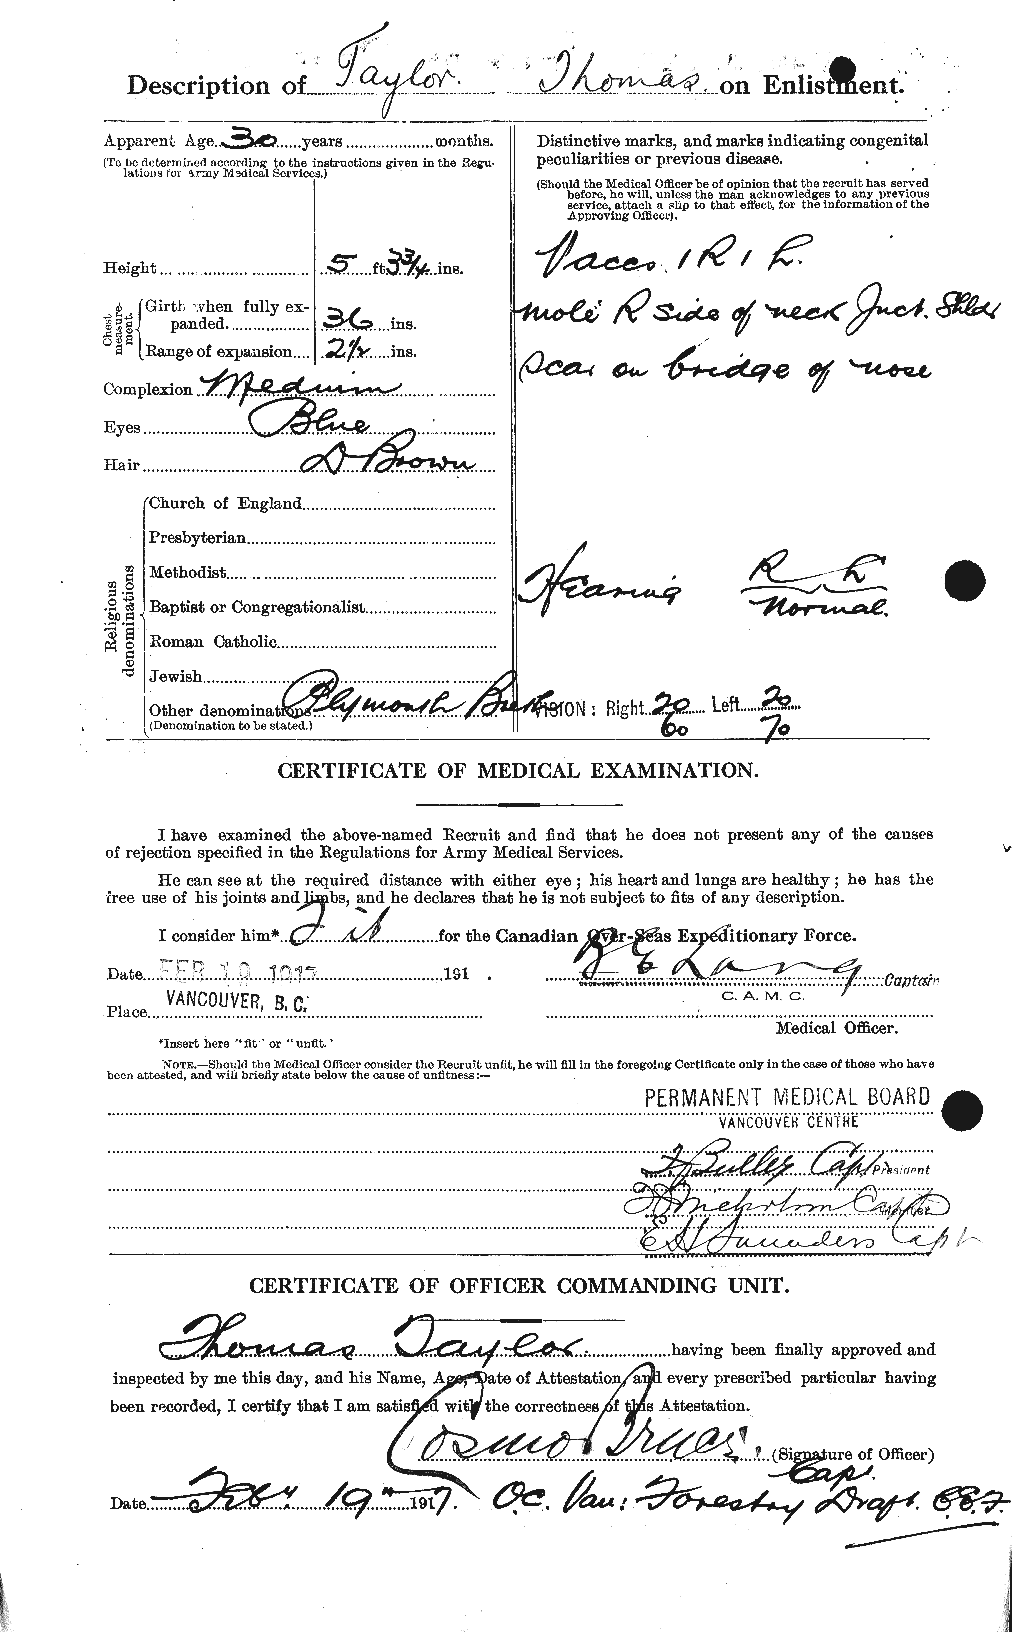 Personnel Records of the First World War - CEF 627955b